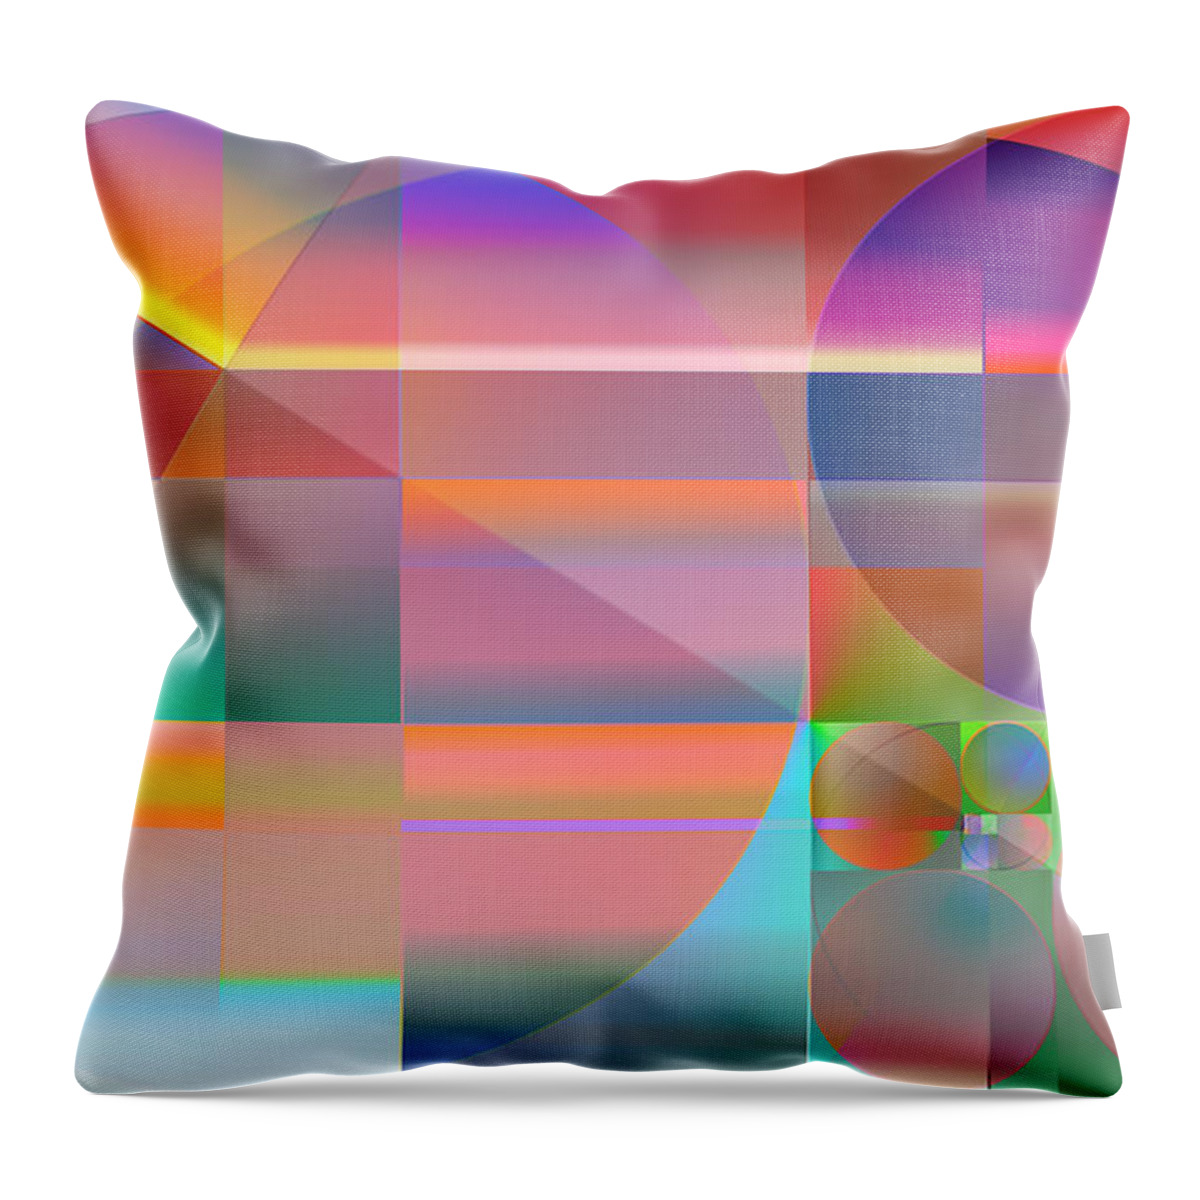 �the Abstracts Plus� Collection By Serge Averbukh Throw Pillow featuring the photograph The Principles Of Life by Serge Averbukh